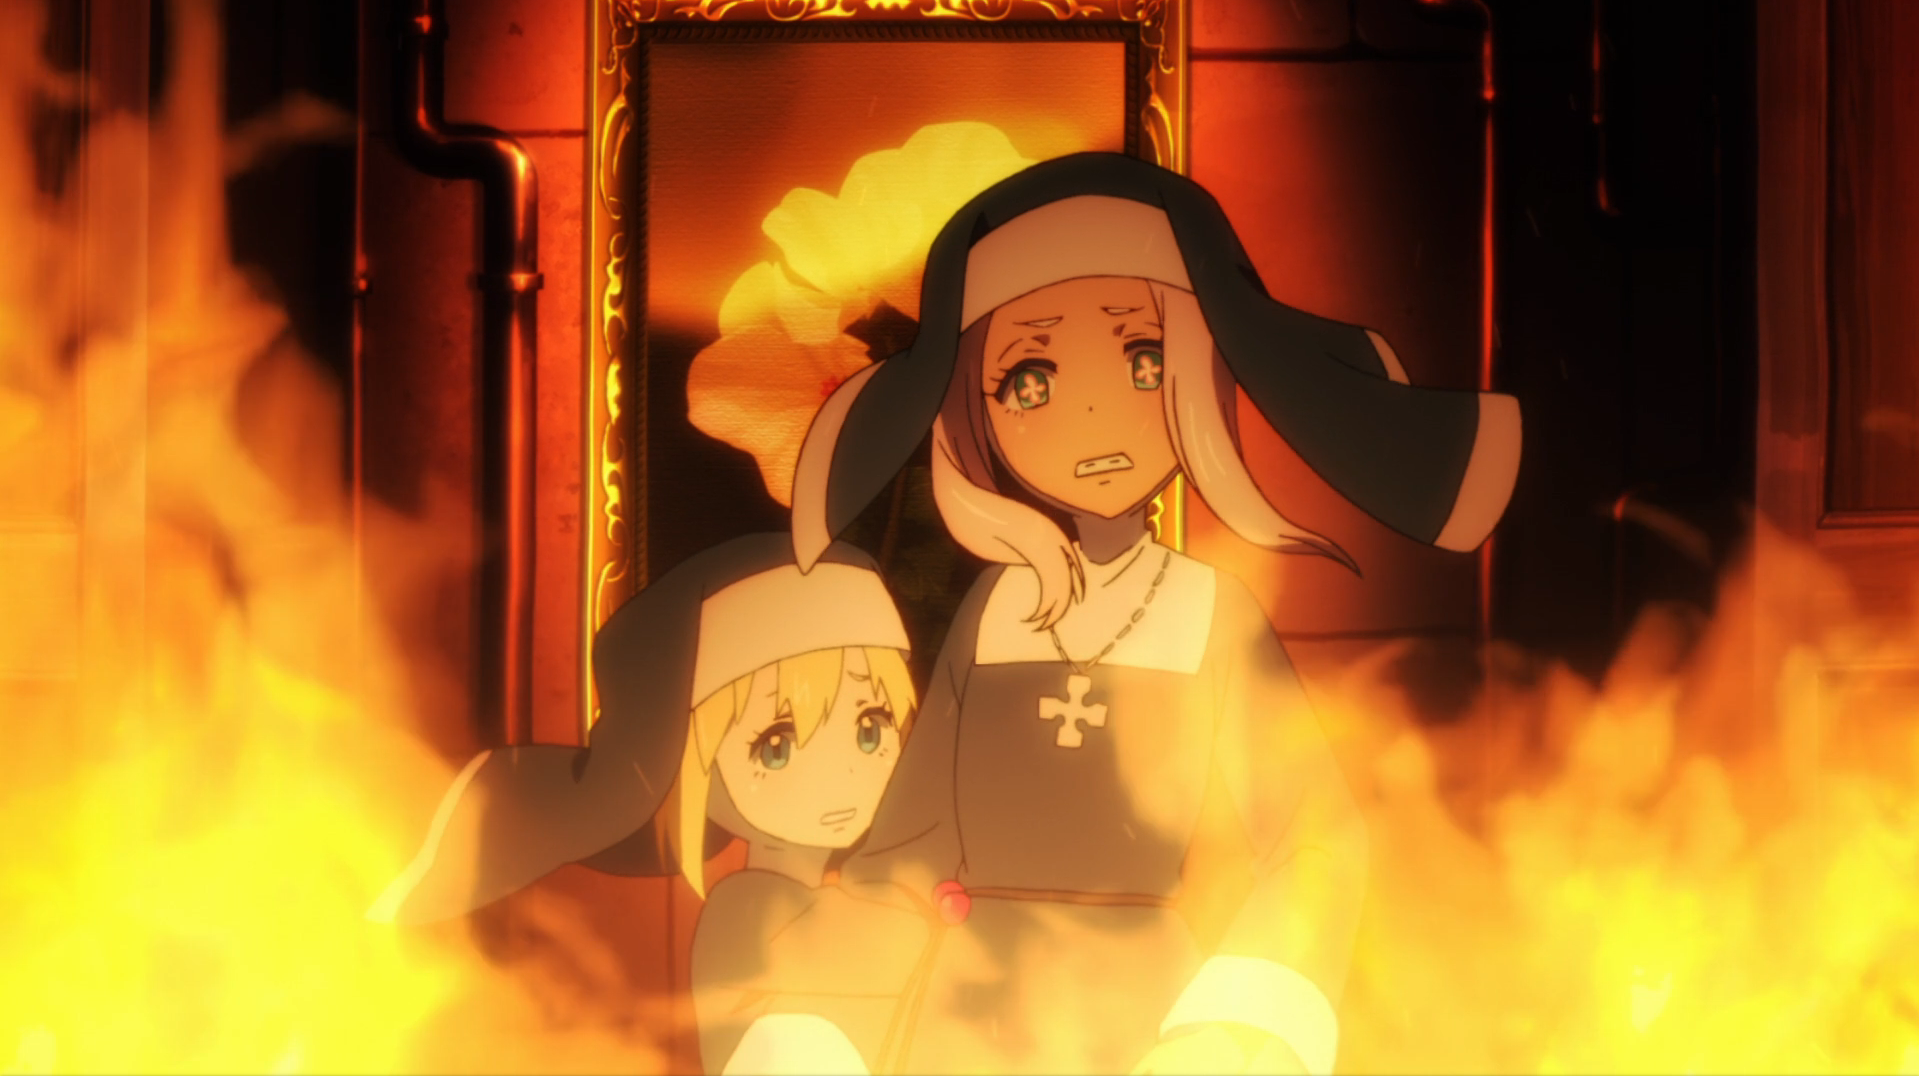 FIRE FORCE STATION  Anime background, Scenery, Fire